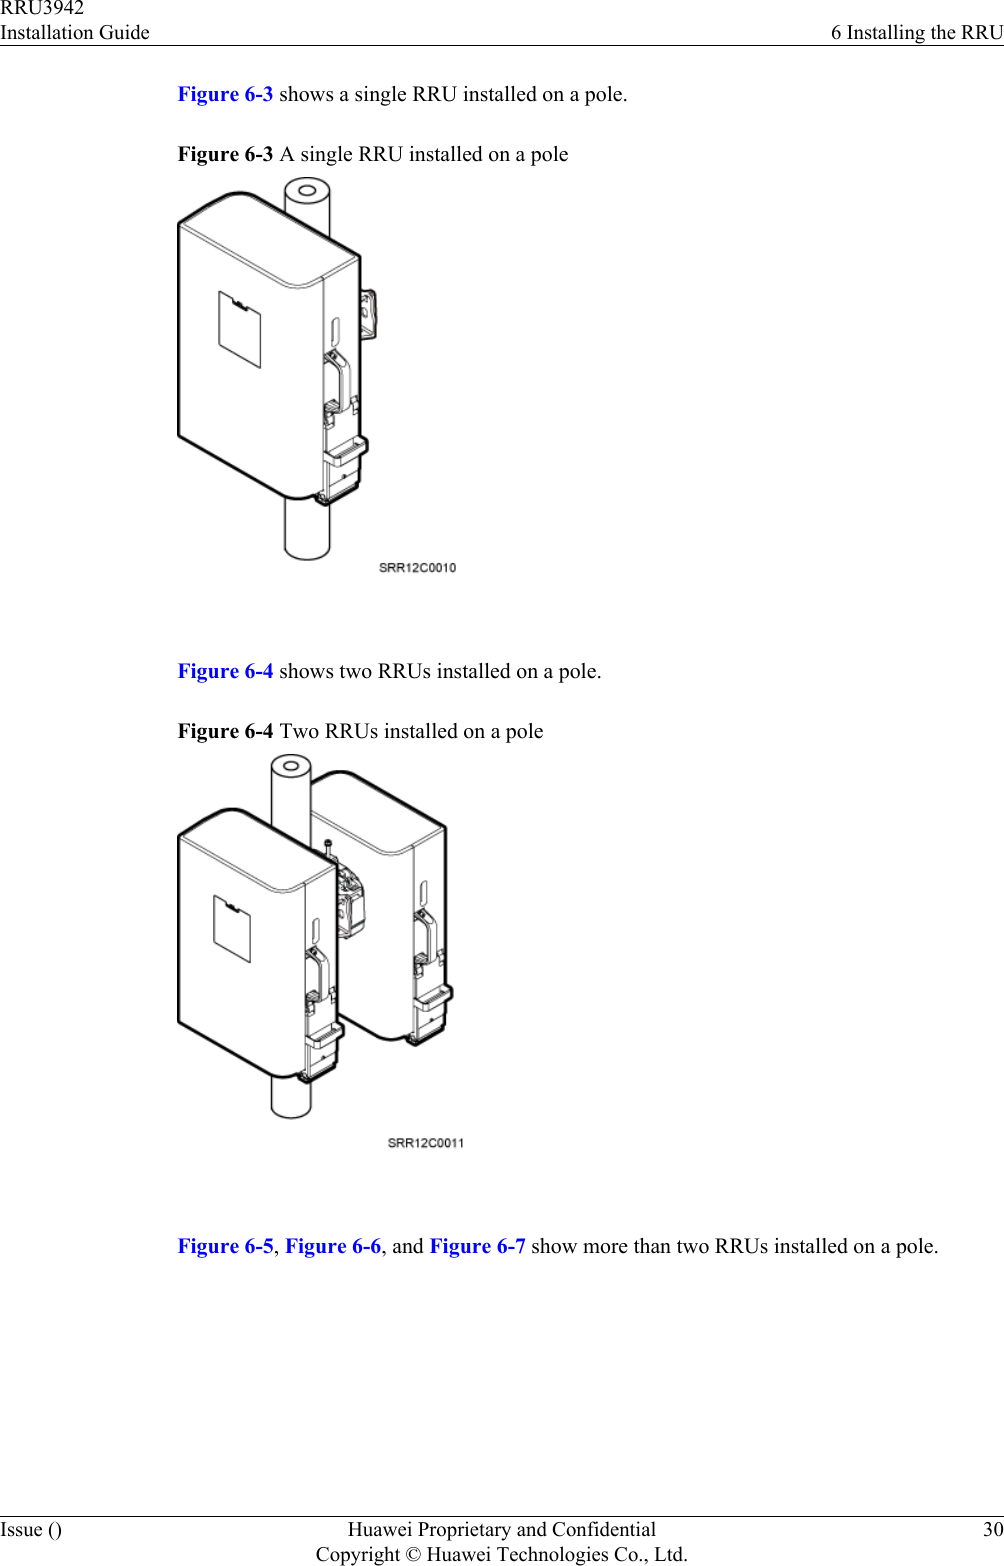 Figure 6-3 shows a single RRU installed on a pole.Figure 6-3 A single RRU installed on a pole Figure 6-4 shows two RRUs installed on a pole.Figure 6-4 Two RRUs installed on a pole Figure 6-5, Figure 6-6, and Figure 6-7 show more than two RRUs installed on a pole.RRU3942Installation Guide 6 Installing the RRUIssue () Huawei Proprietary and ConfidentialCopyright © Huawei Technologies Co., Ltd.30